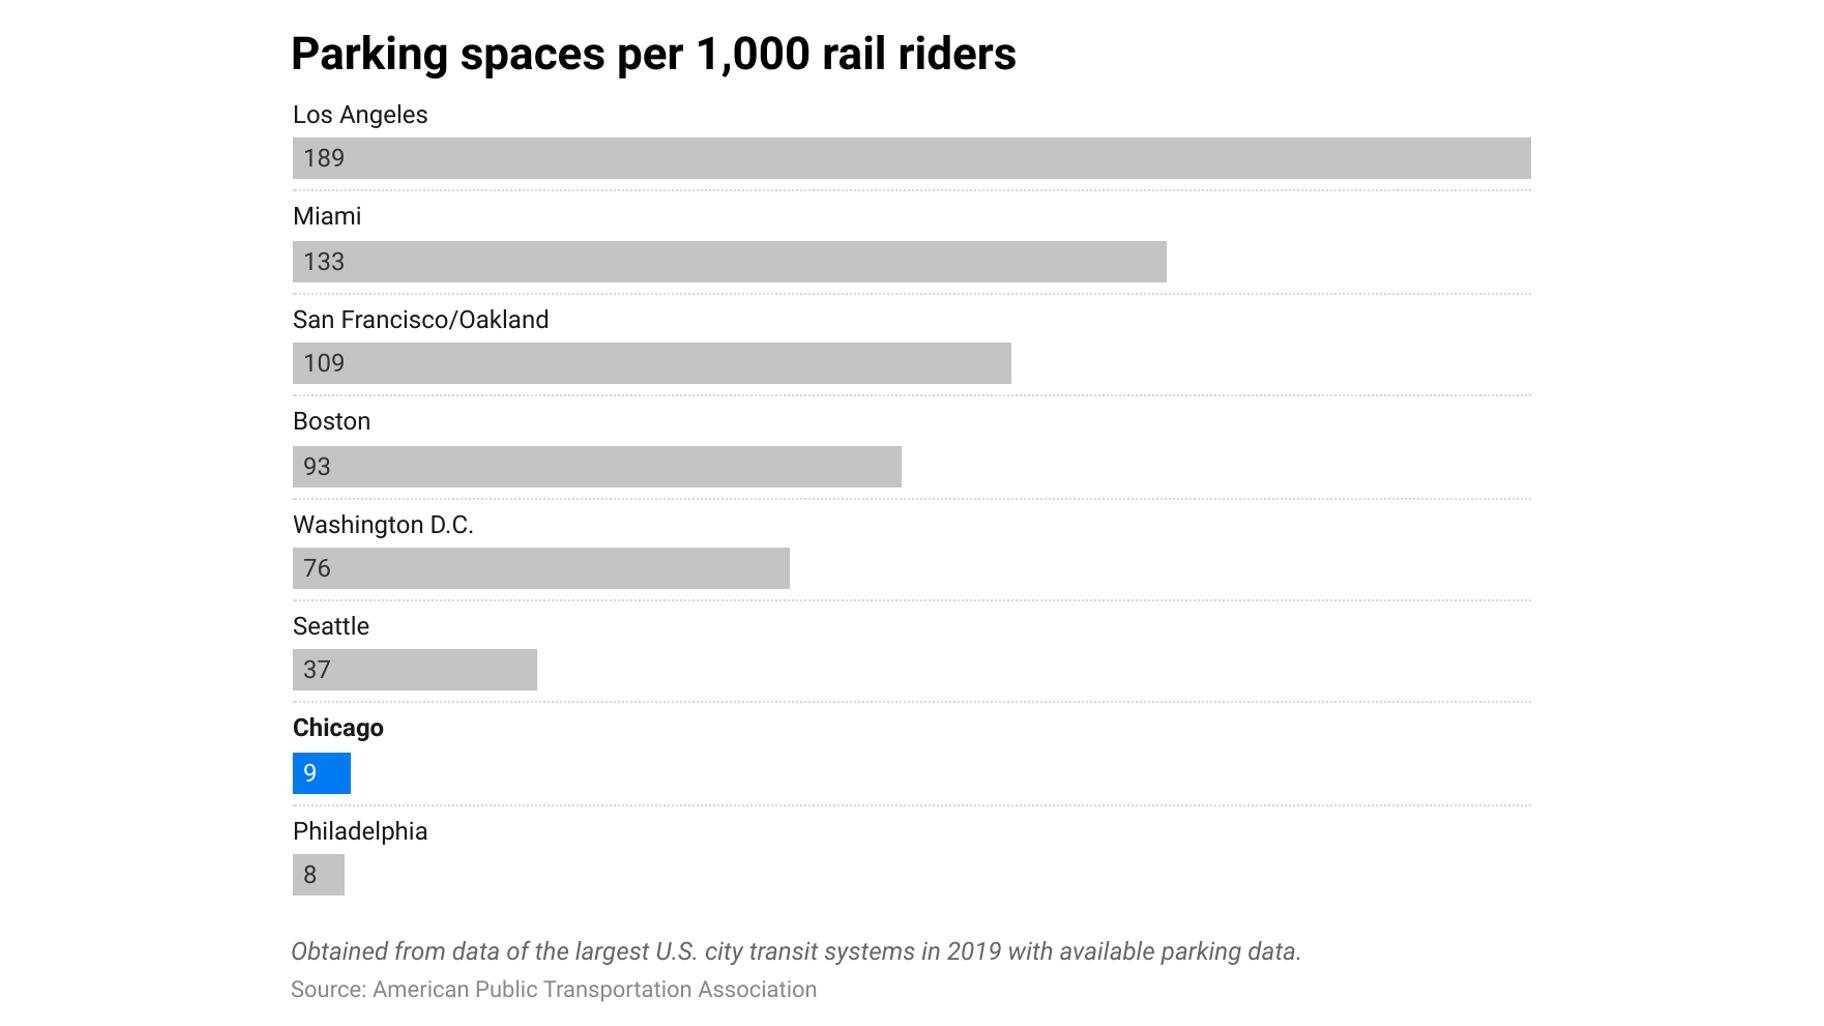 A look at how commuter parking spots in Chicago compares to other cities.